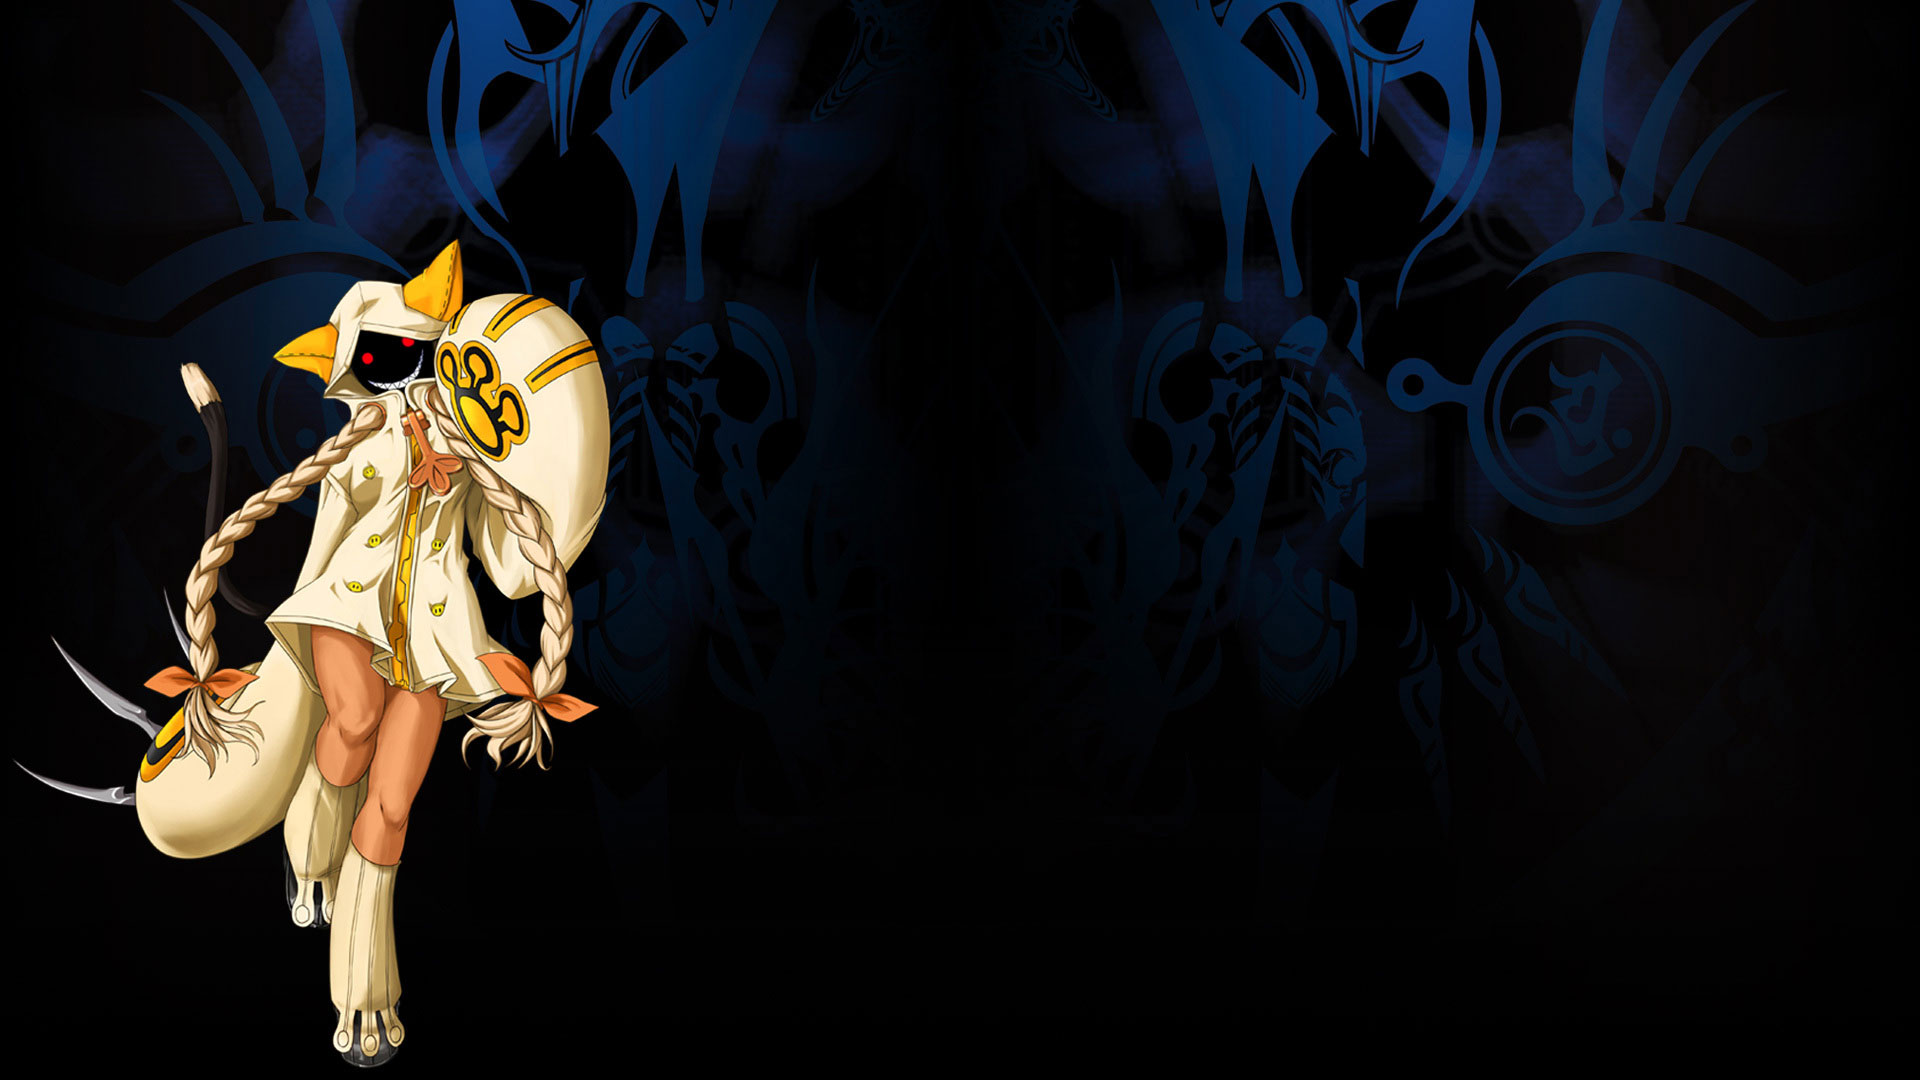 Wallpaper Blazblue Calamity Trigger Ethereal Games